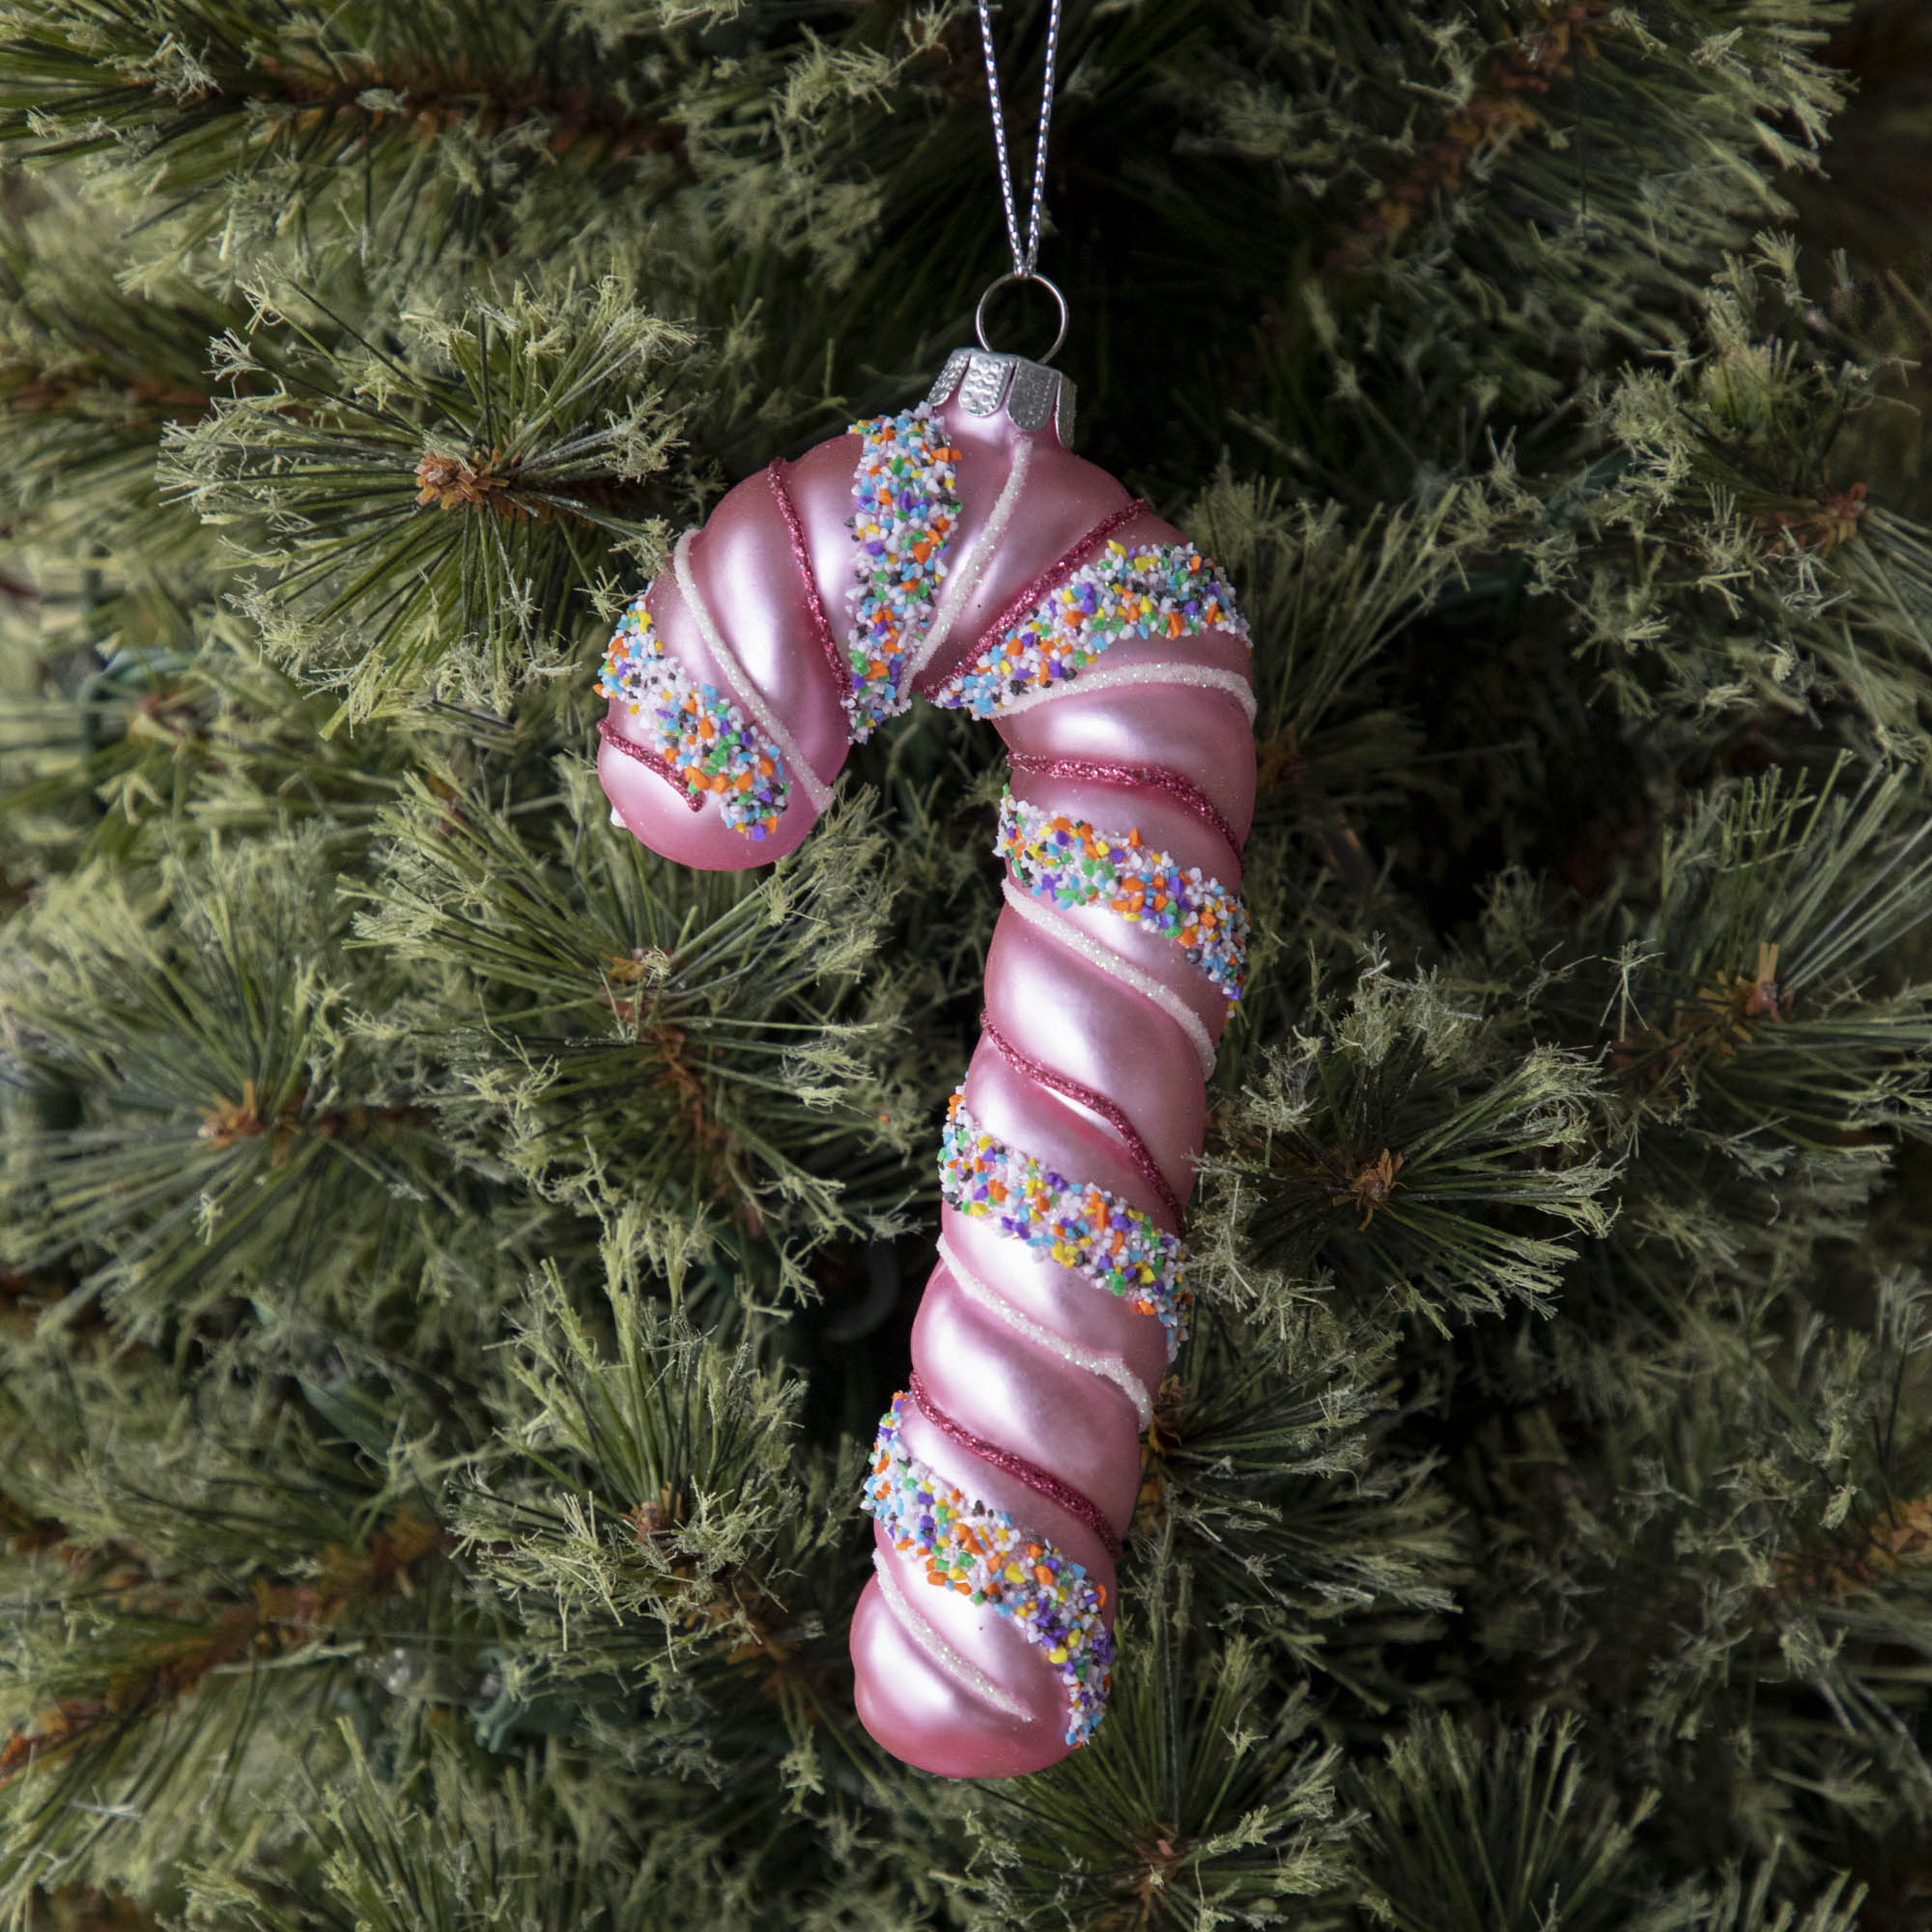 Four festive Glitterville candy cane ornaments on a marble table.